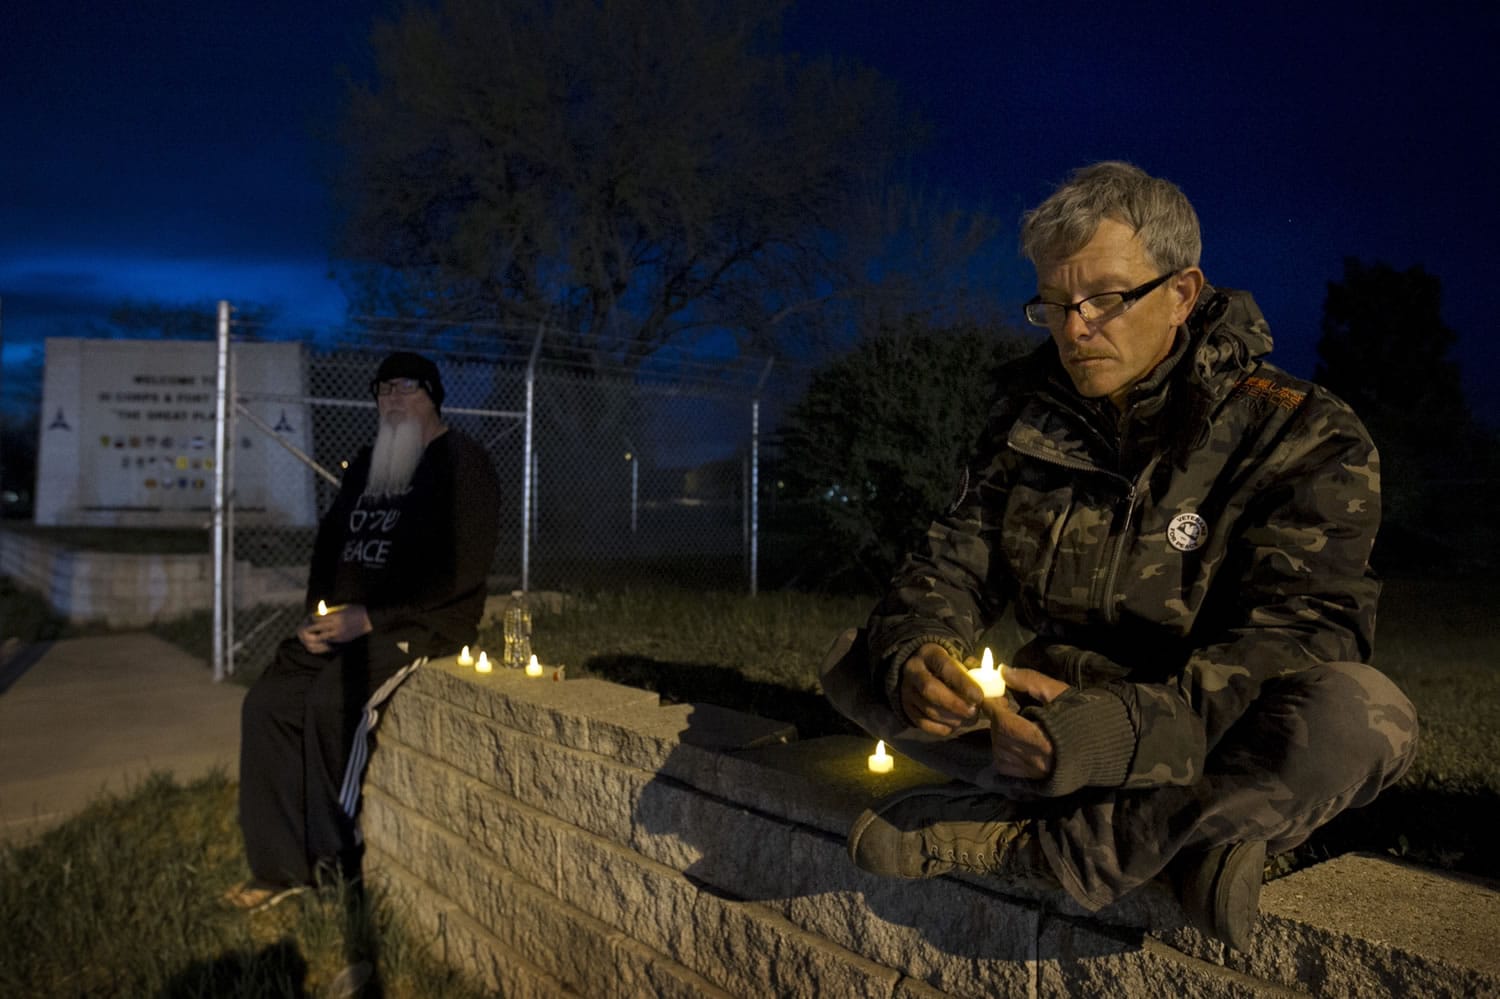 Army veterans David Bass, left, Michael Clift participate in a candlelight vigil for the victims of Wednesday's shooting at Fort Hood, at the East Gate of the Texas military base, on Friday, April 4, 2014. The Fort Hood soldier who gunned down three other military men before killing himself had an argument with colleagues in his unit before opening fire, and investigators believe his mental condition was not the &quot;direct precipitating factor&quot; in the shooting, authorities said Friday.